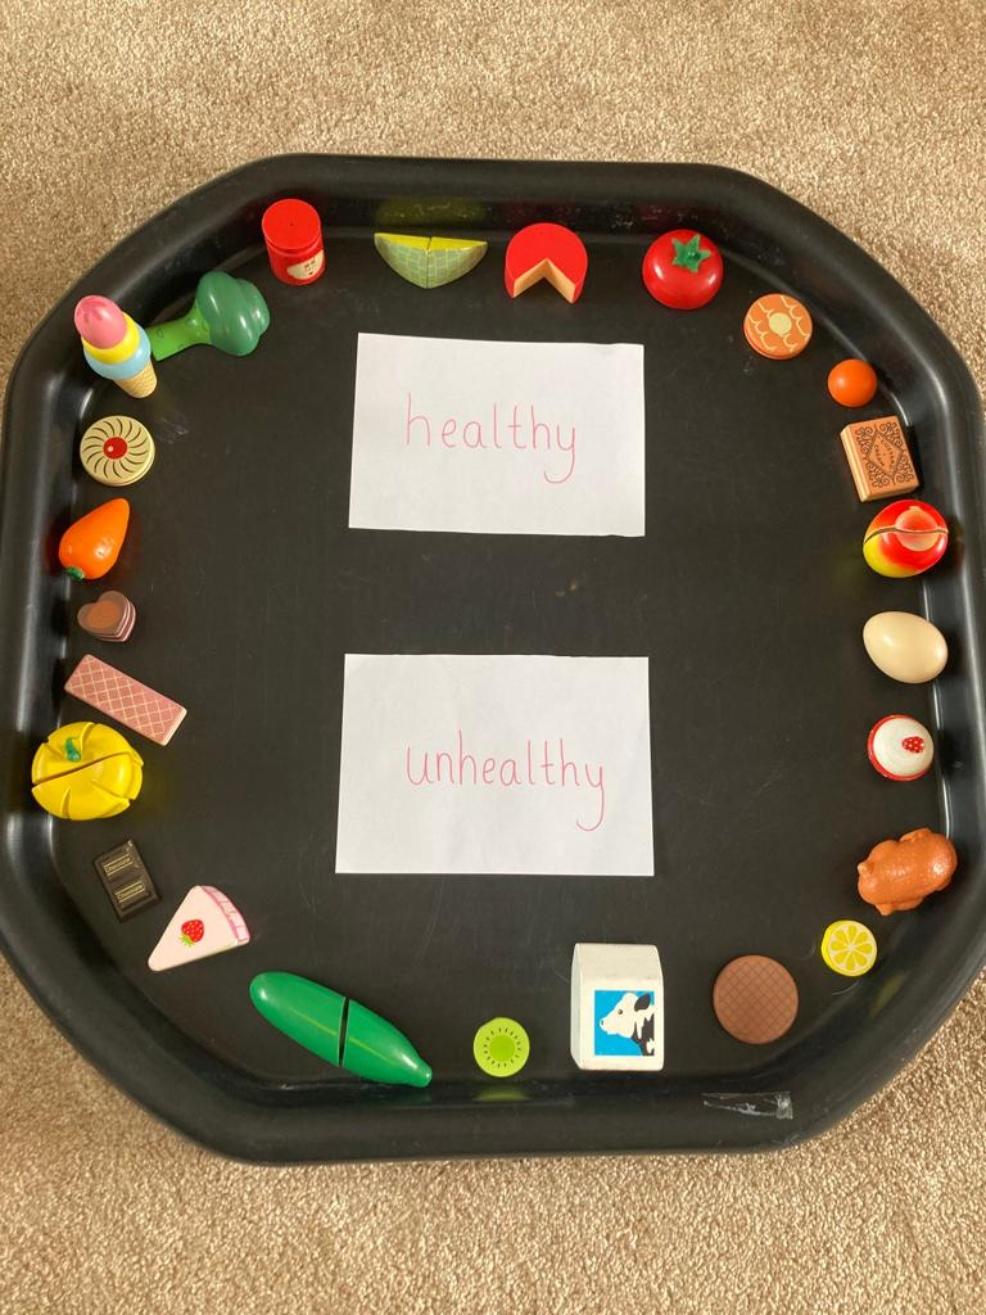 picture of a Healthy food sorting activity for kids